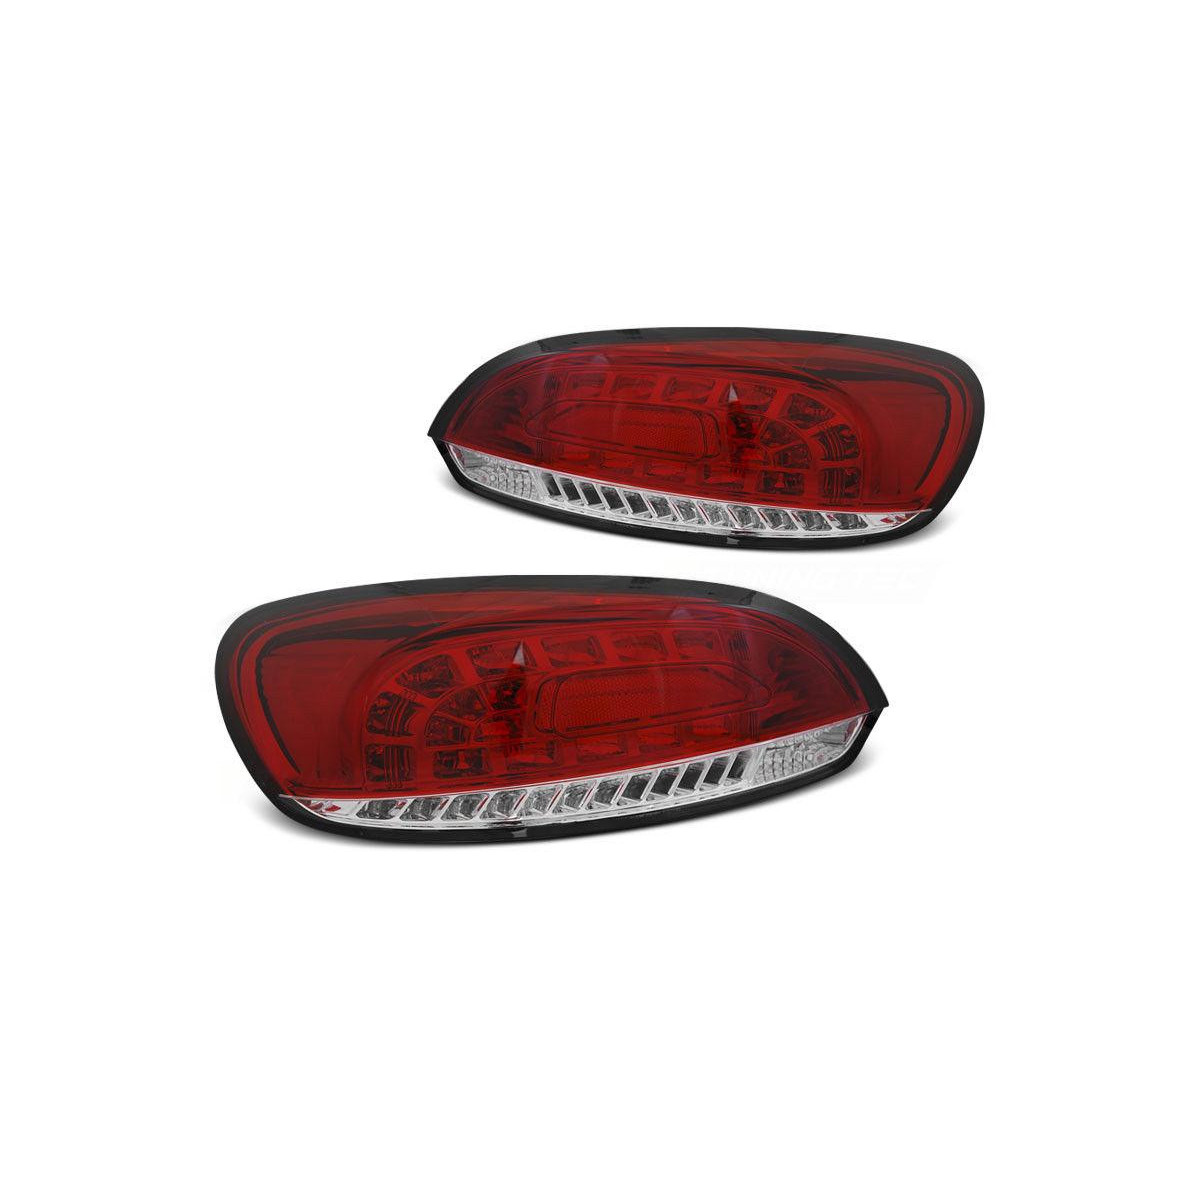 LAMPY TYLNE LED VW SCIROCCO 08-4/14 RED WHITE